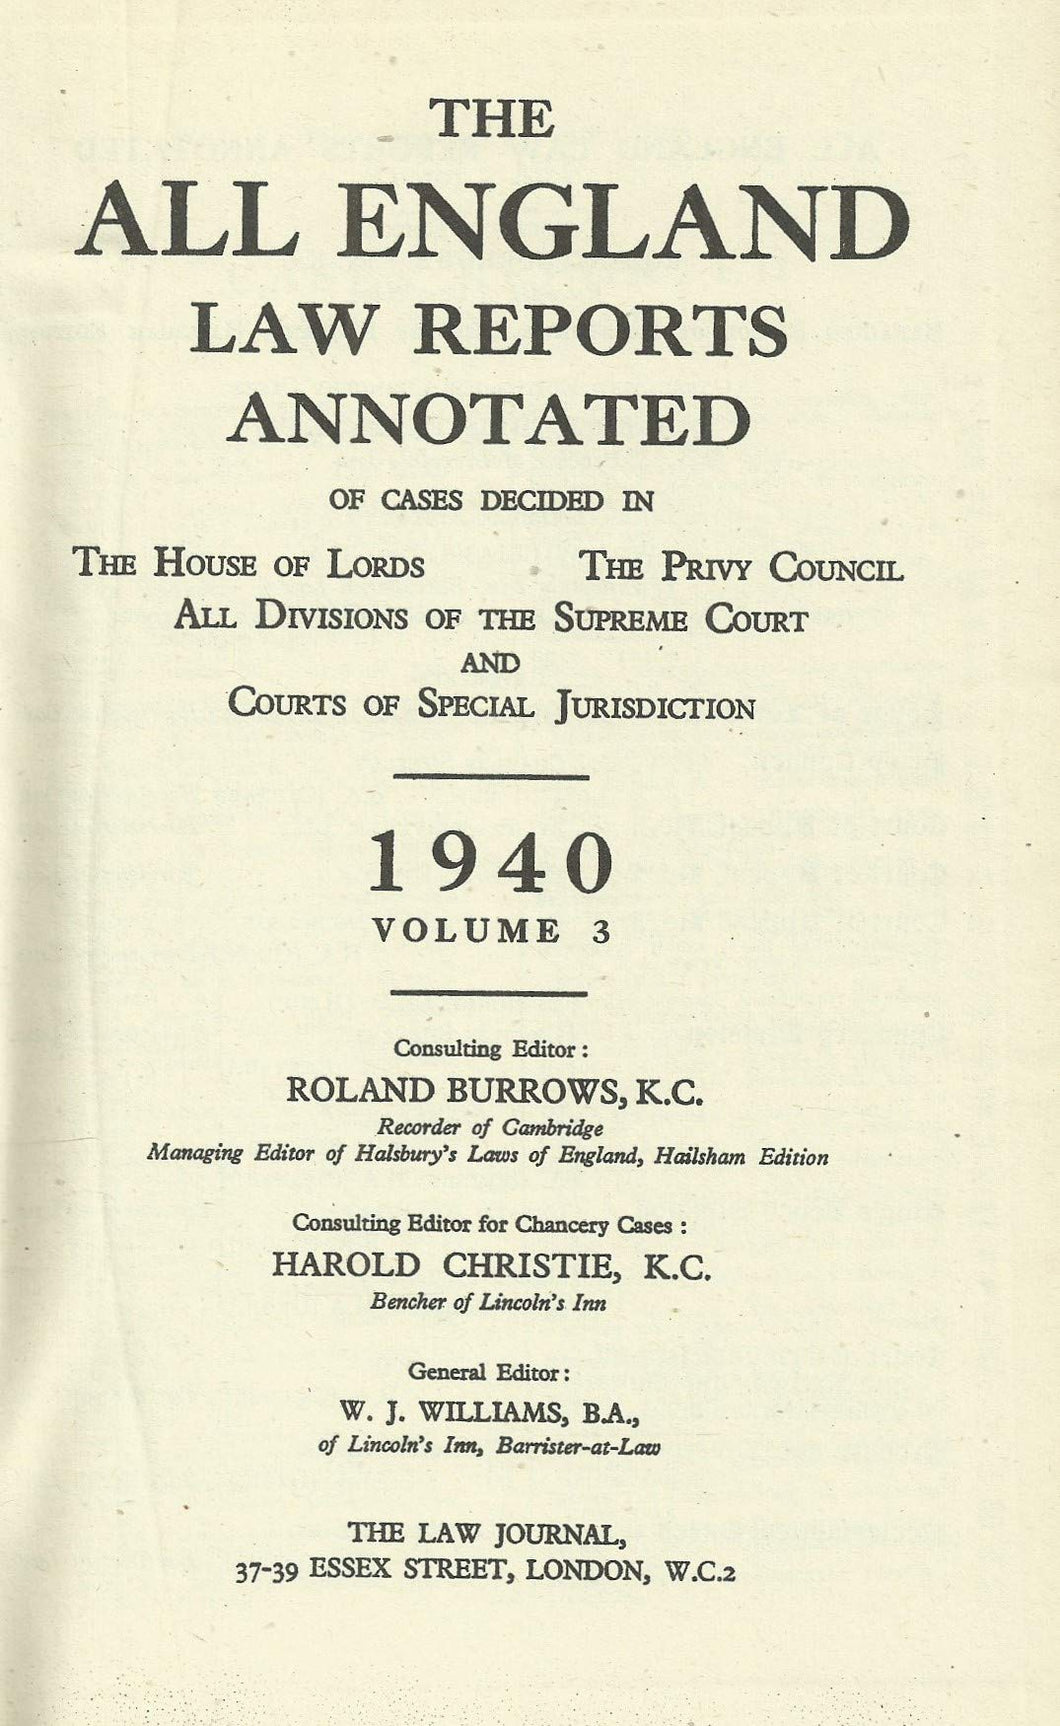 The All England Law Reports Annotated: 1940 Vol 3